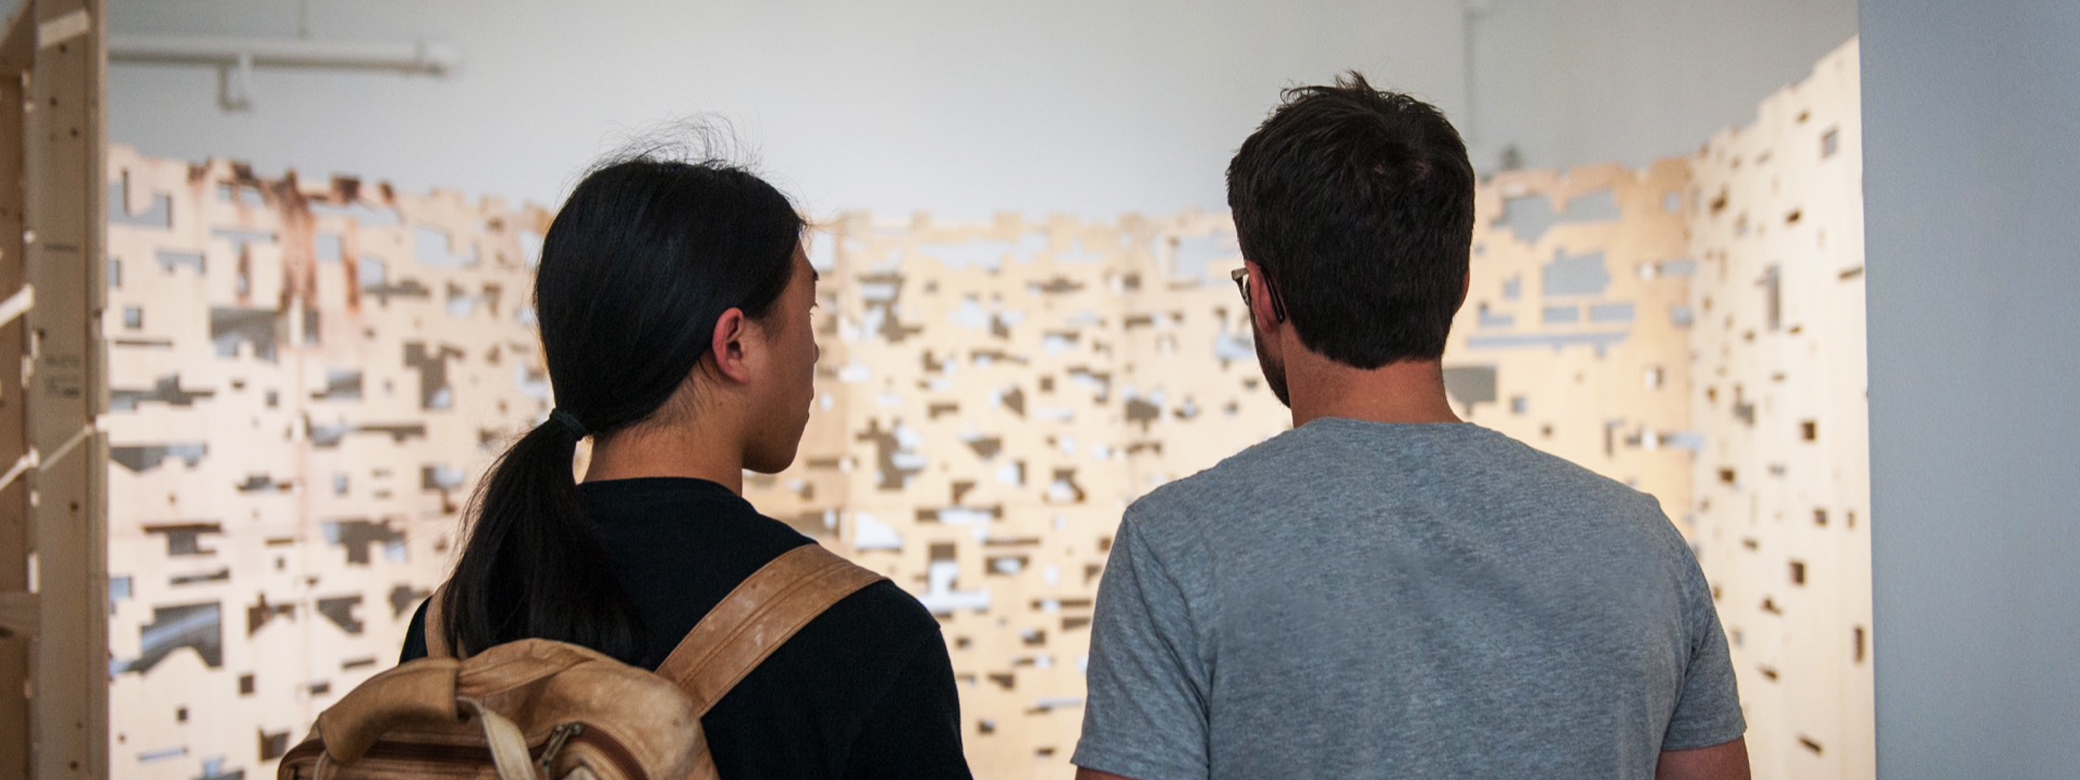 Two students looking at an art installation